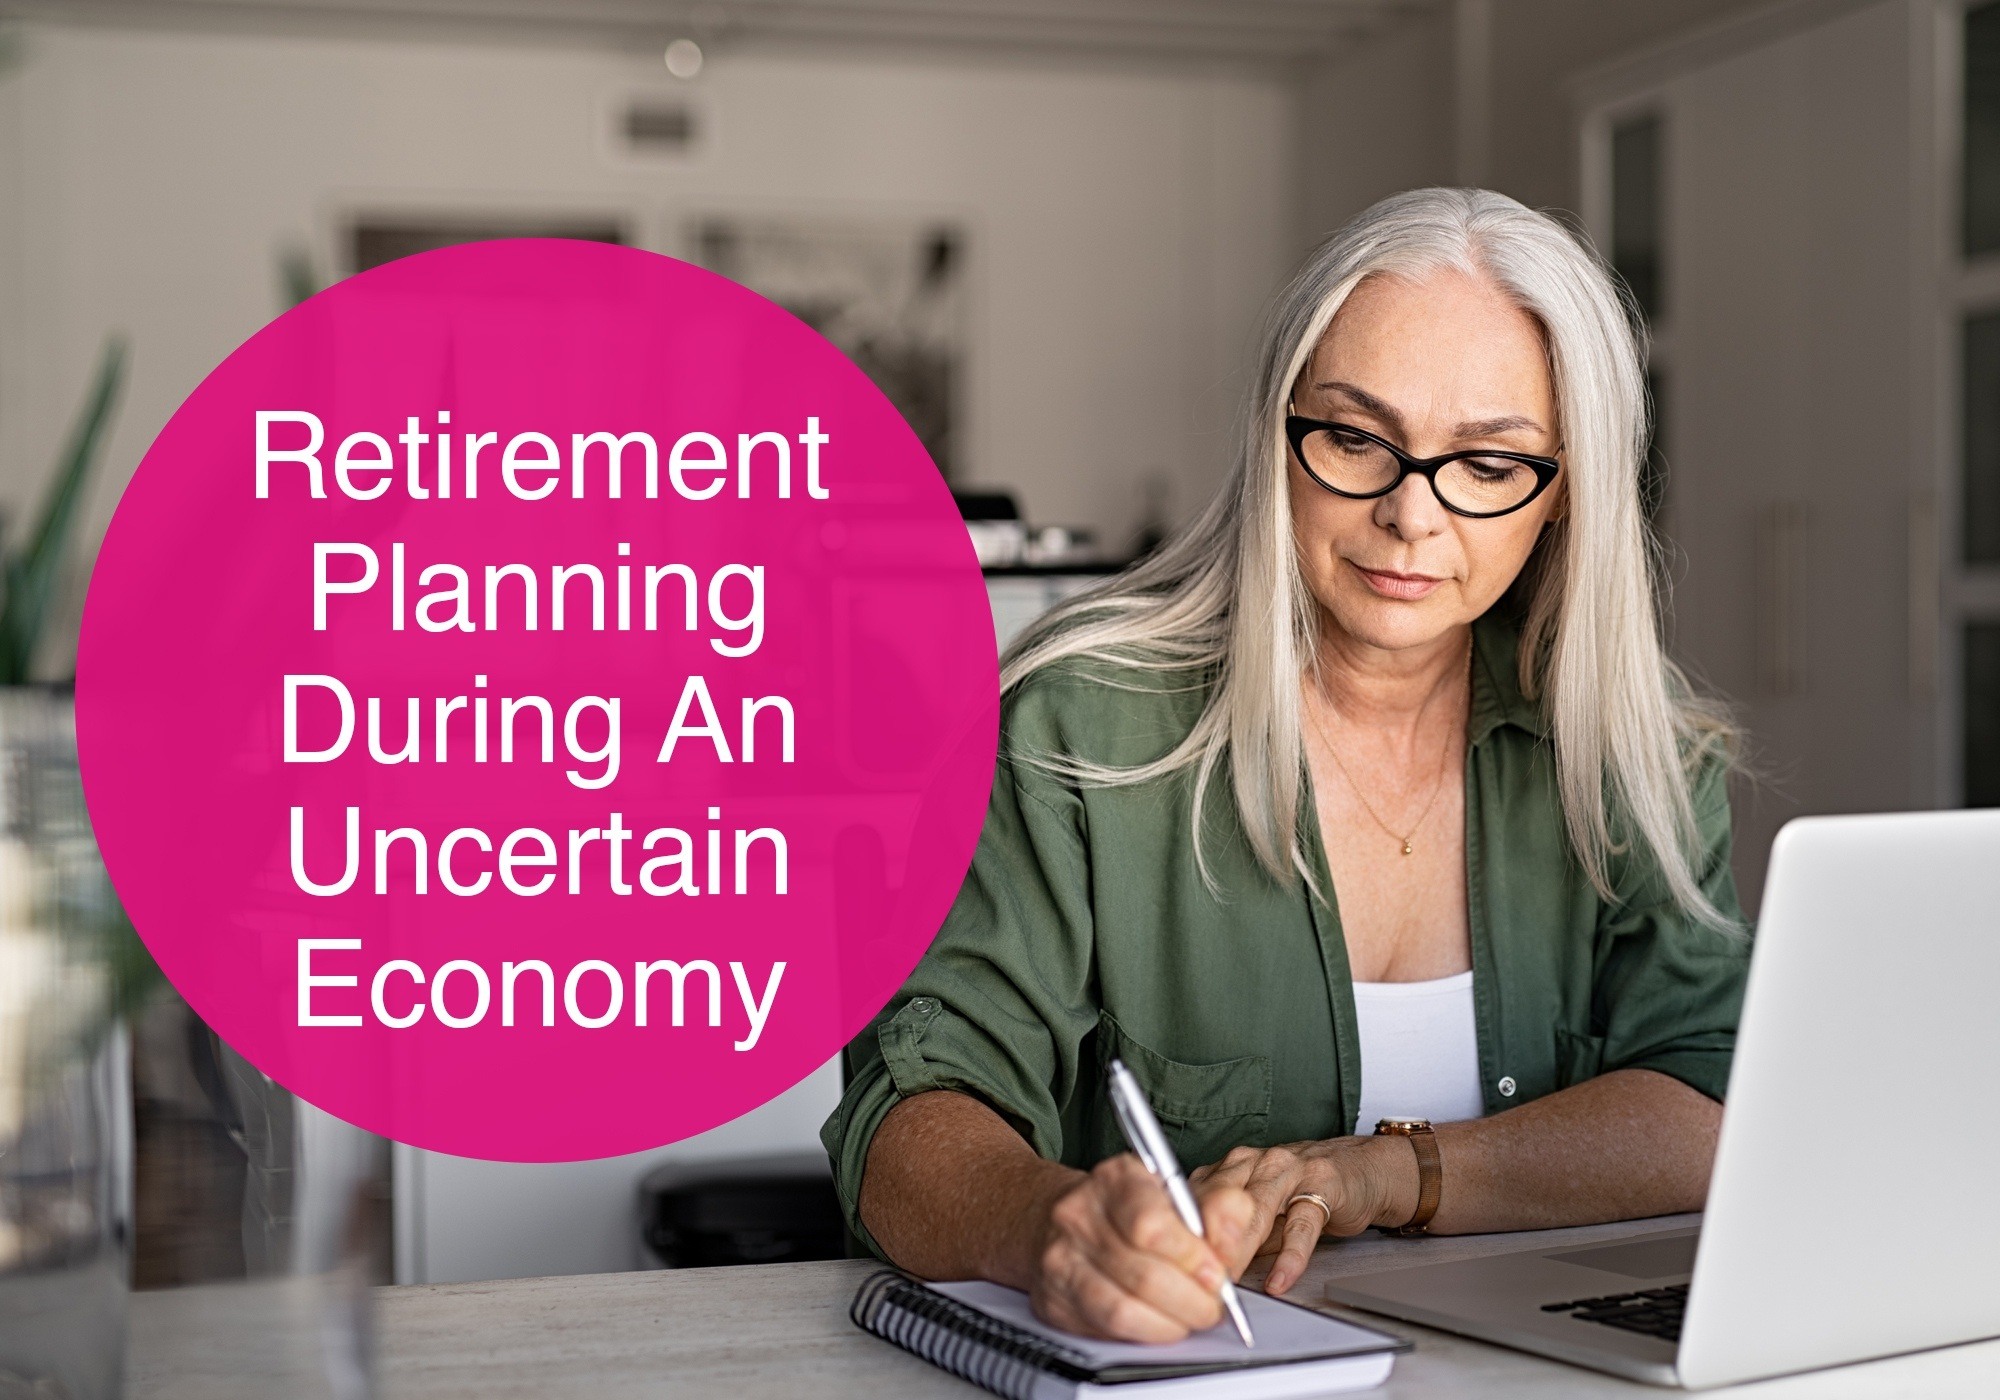 Image for retirement planning for an uncertain economy